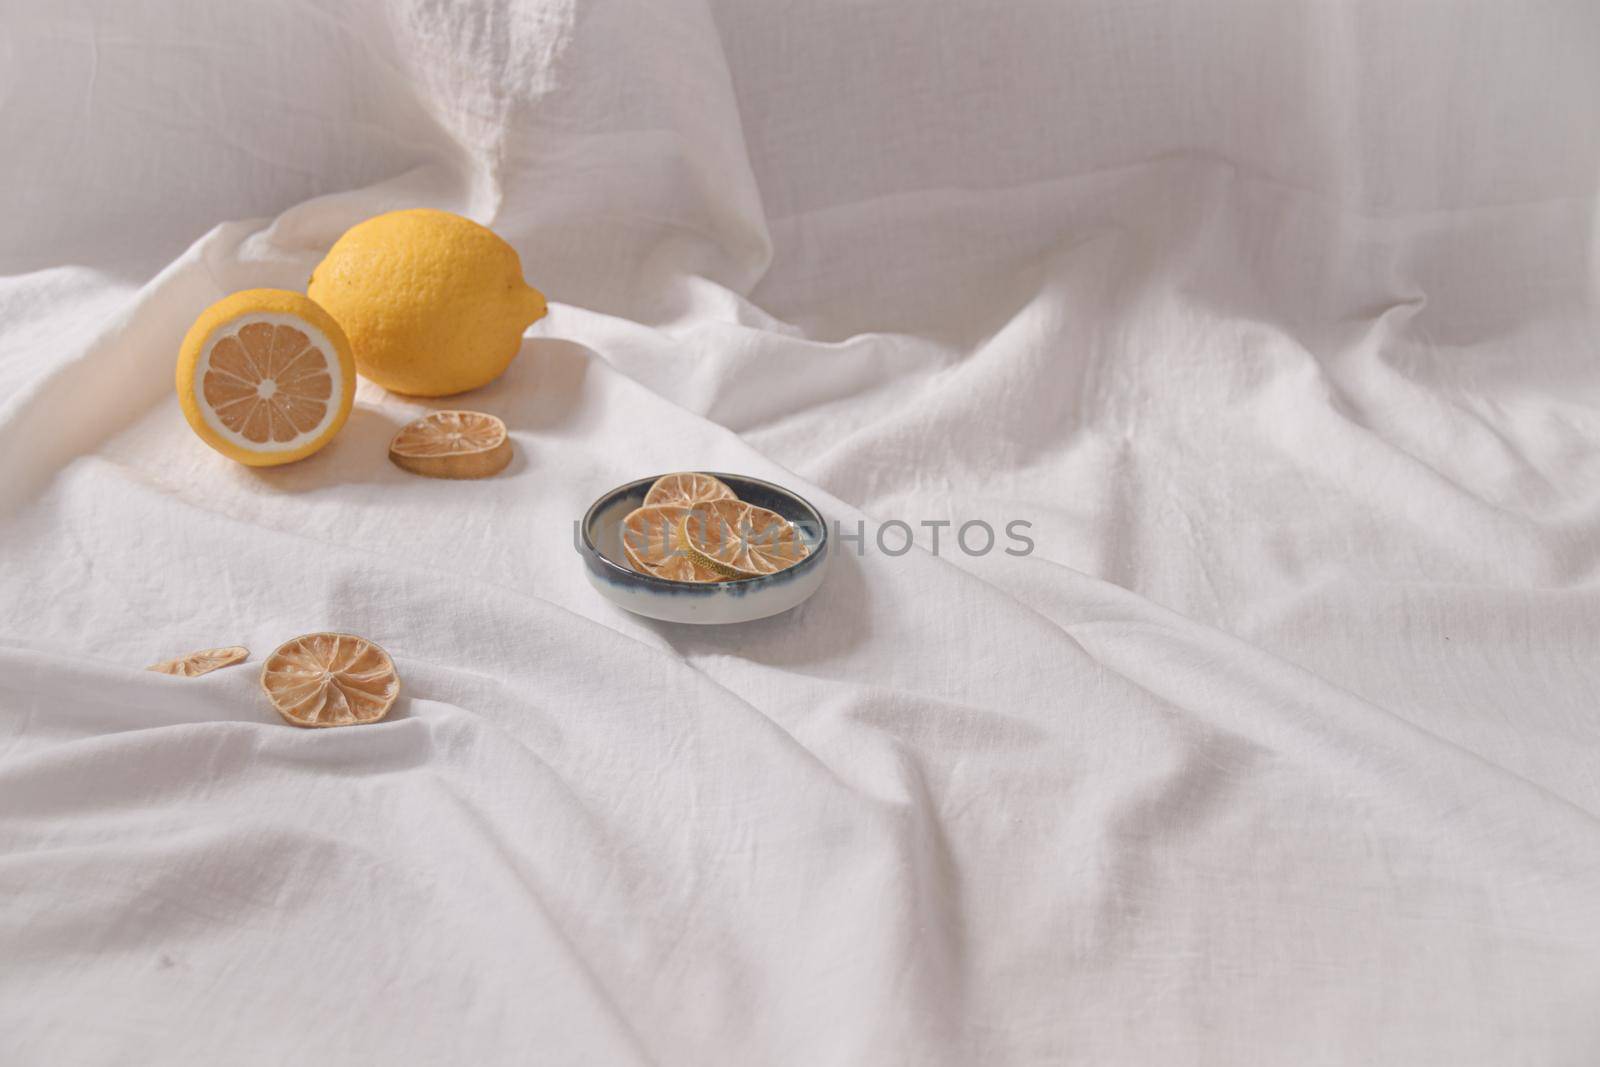 Minimalist still life of fresh and dried lemons showing the concept of freshness, summer aesthetic and healthy sustainable living